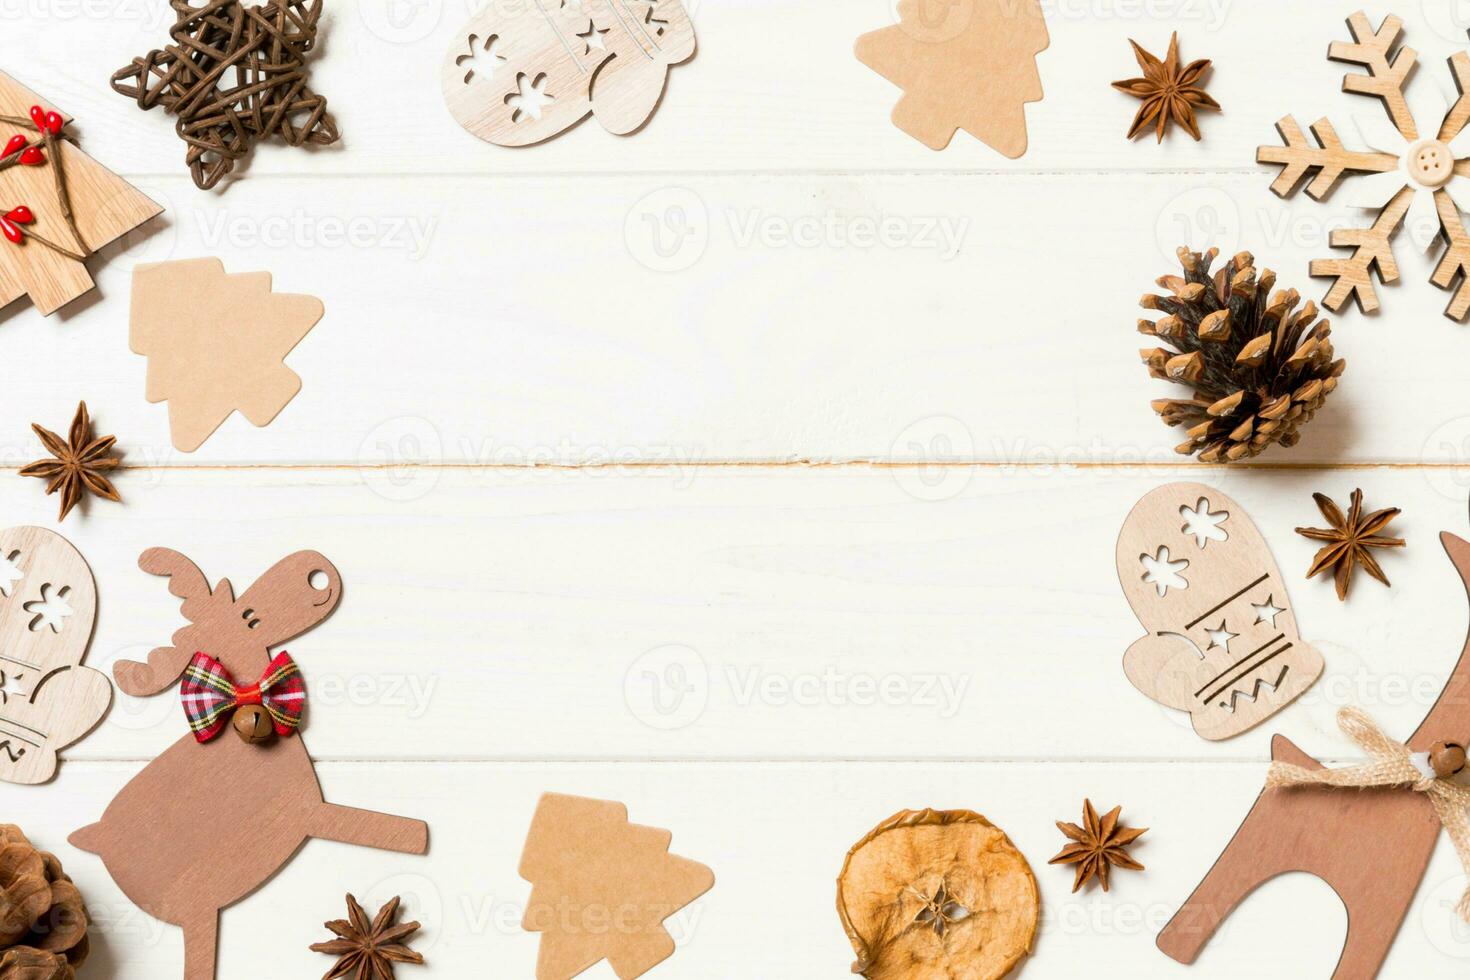 Top view of Christmas decorations and toys on wooden background. Copy space. Empty place for your design. New Year concept photo